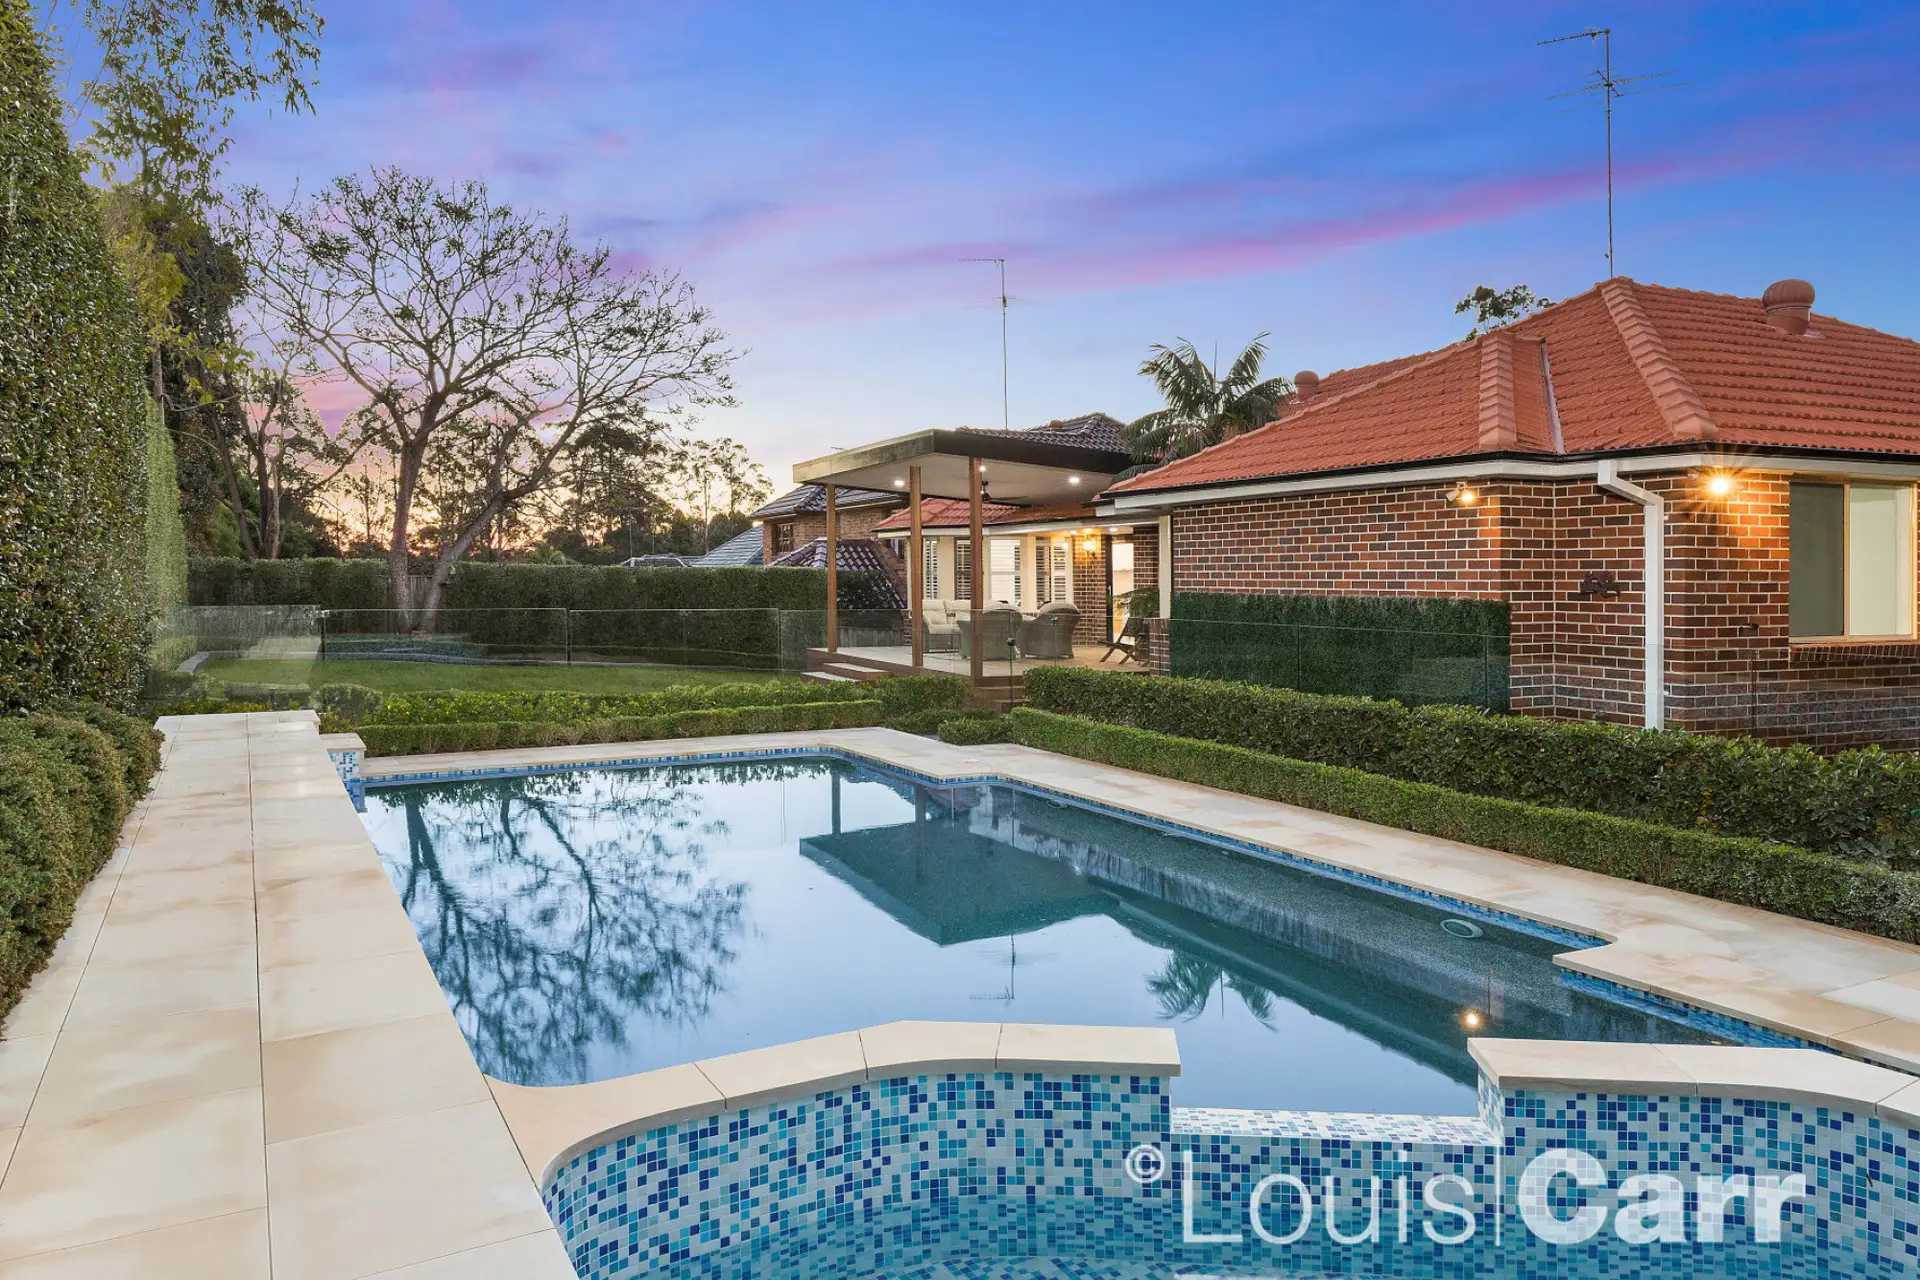 Photo #11: 11 Avonleigh Way, West Pennant Hills - Sold by Louis Carr Real Estate